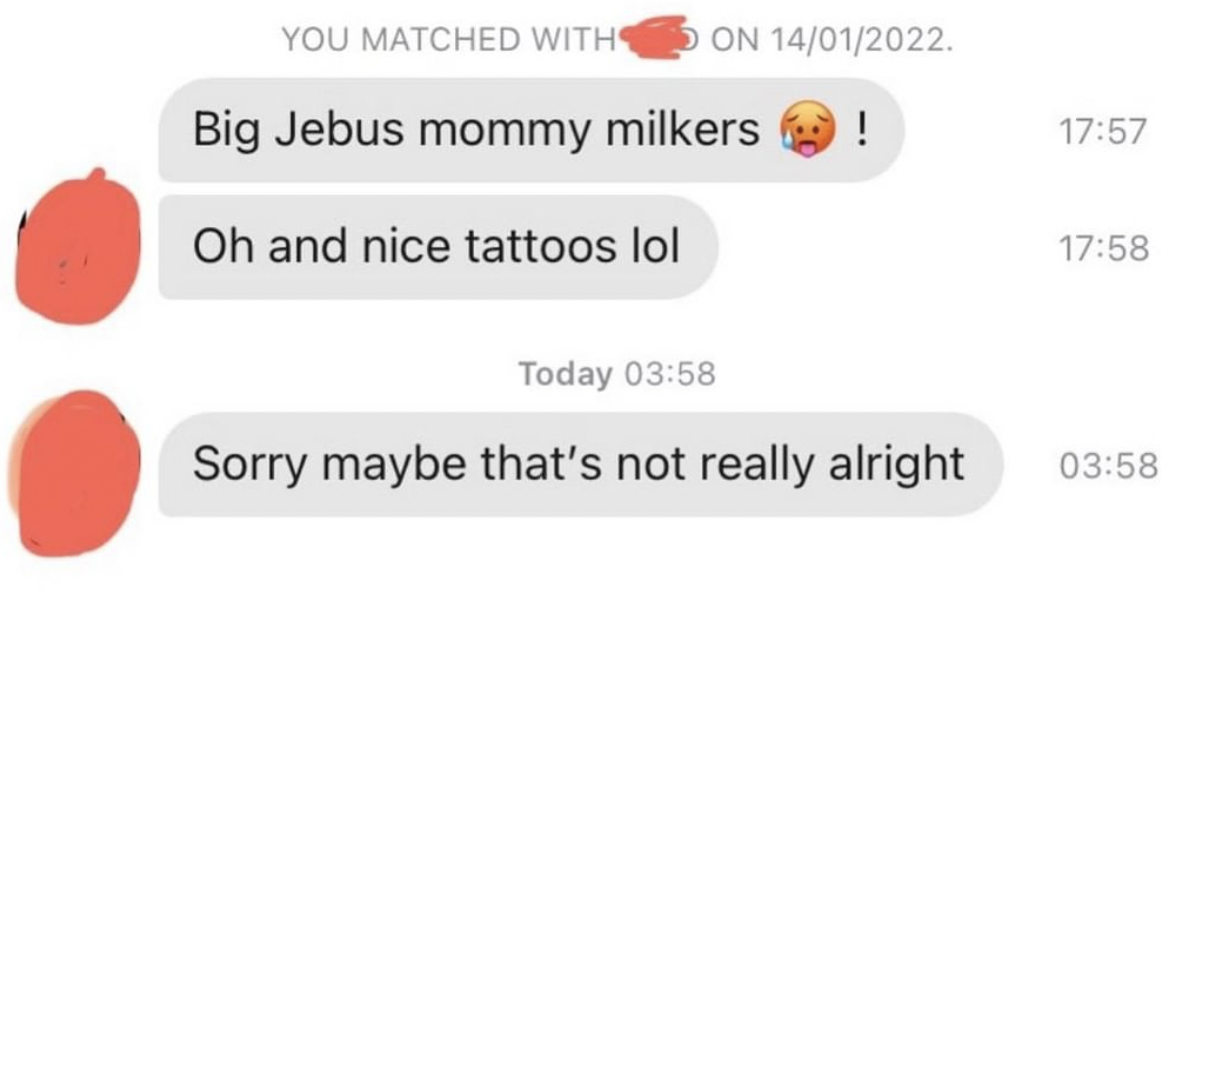 cringe tinder openers - number - You Matched With On 14012022. Big Jebus mommy milkers ! Oh and nice tattoos lol Today Sorry maybe that's not really alright